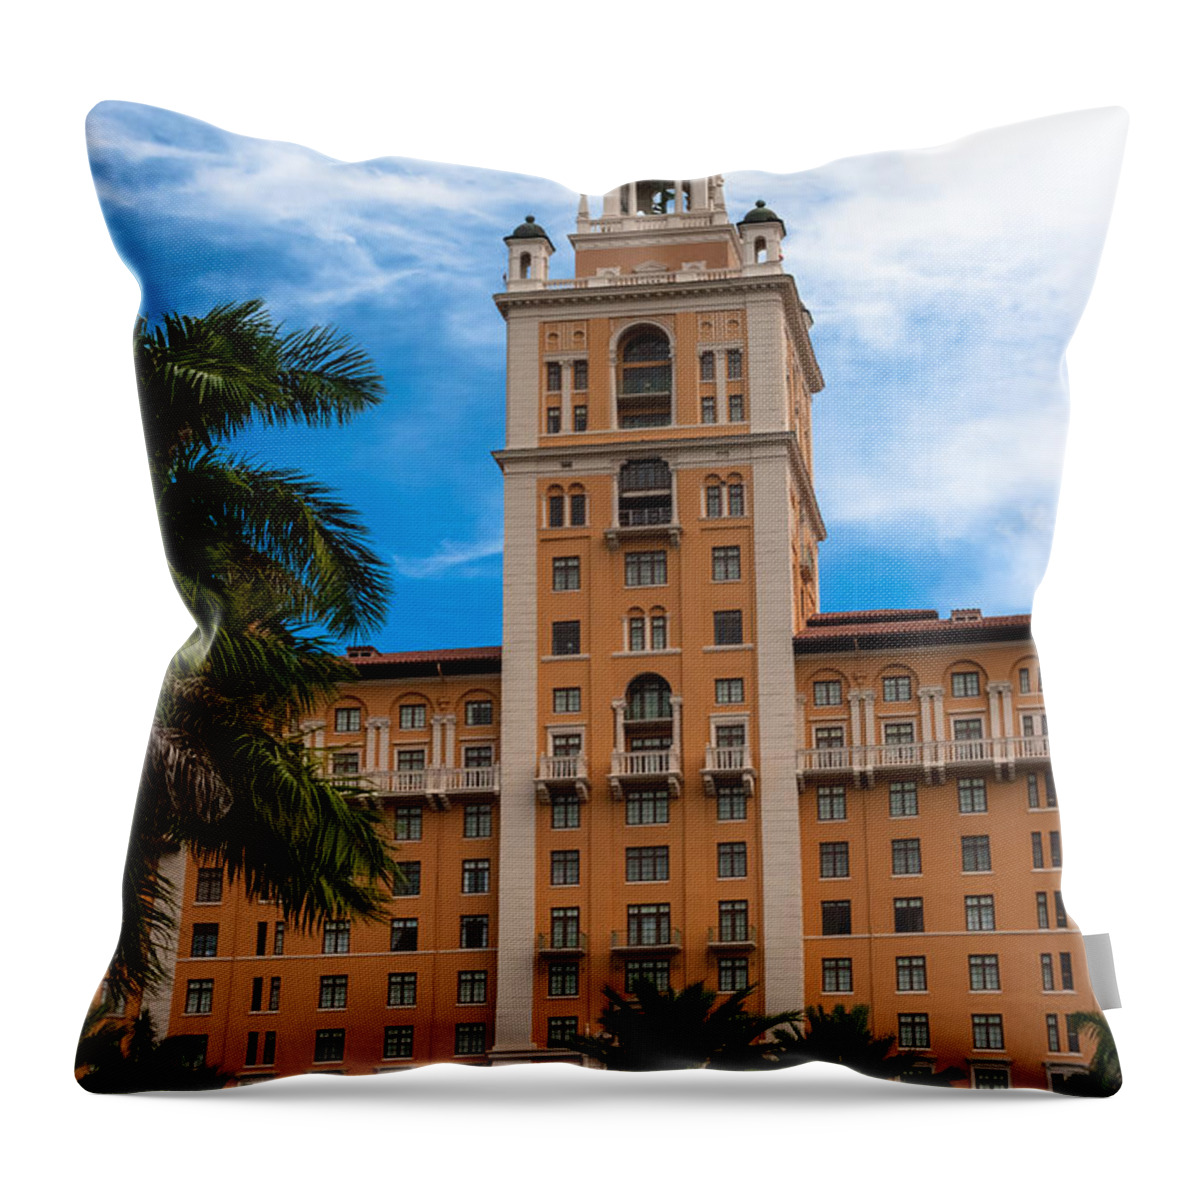 1926 Throw Pillow featuring the photograph Coral Gables Biltmore Hotel by Ed Gleichman